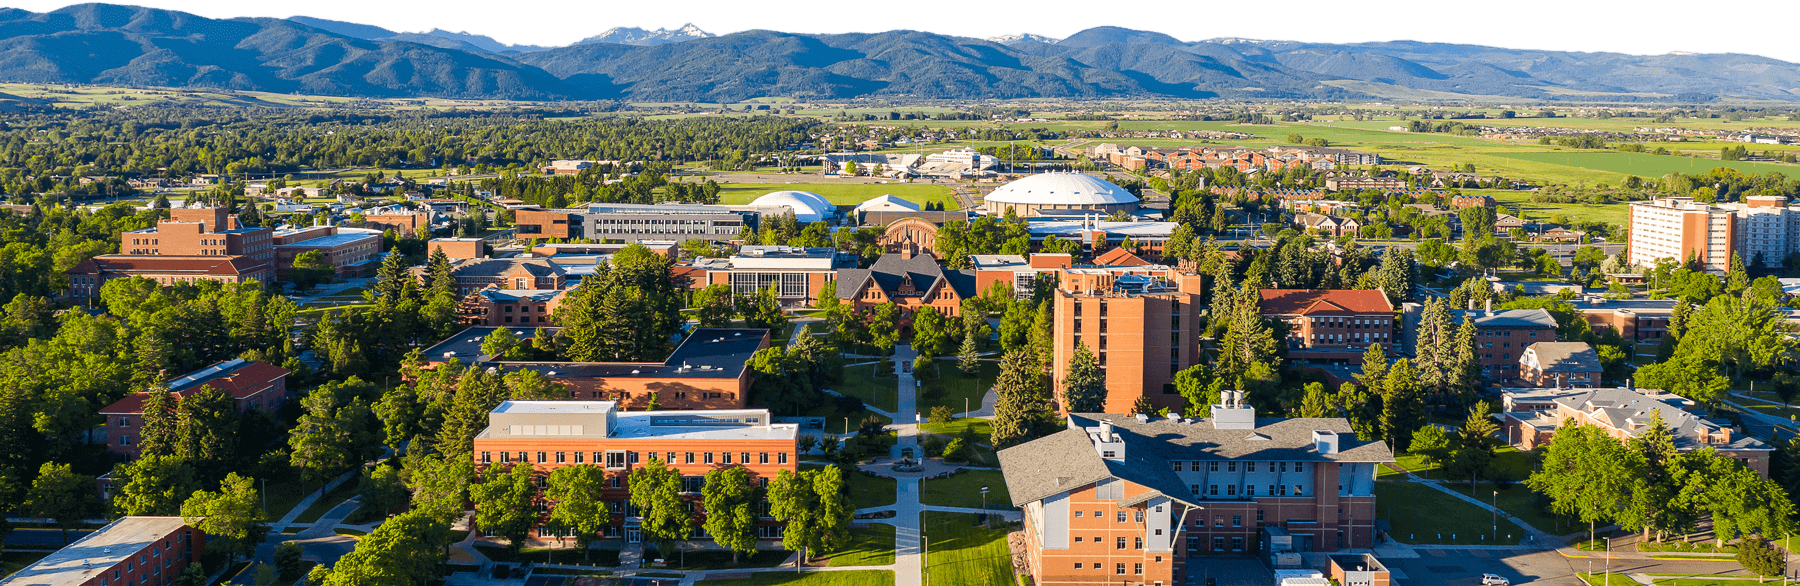 Tuition for Montana State University